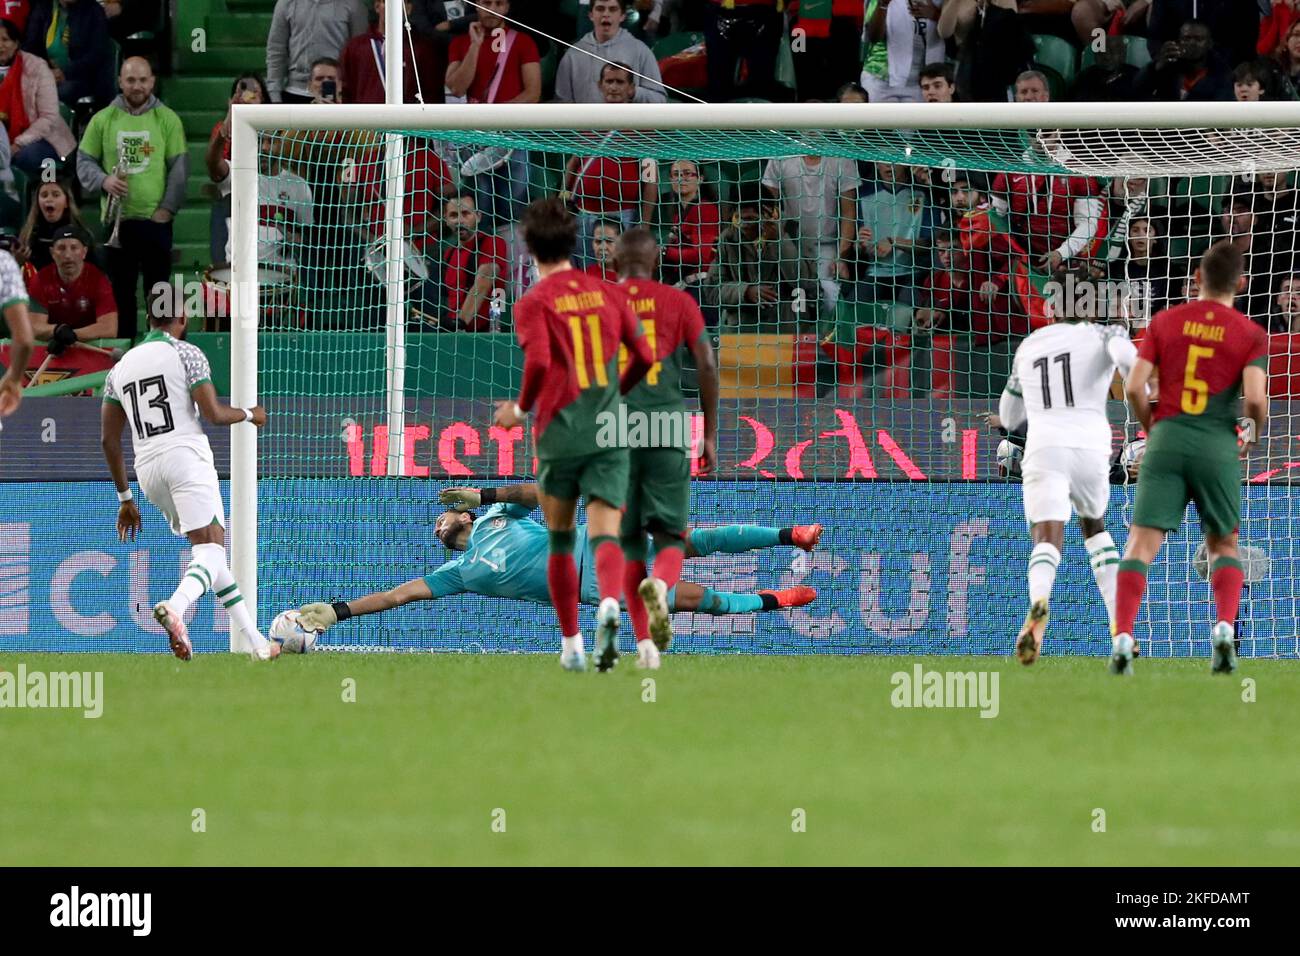 Lisbon. 17th Nov, 2022. Portugal's goalkeeper Rui Patricio (2nd L) makes a save during an international friendly football match between Portugal and Nigeria in Lisbon, Portugal, on Nov. 17, 2022 Credit: Pedro Fiuza/Xinhua/Alamy Live News Stock Photo